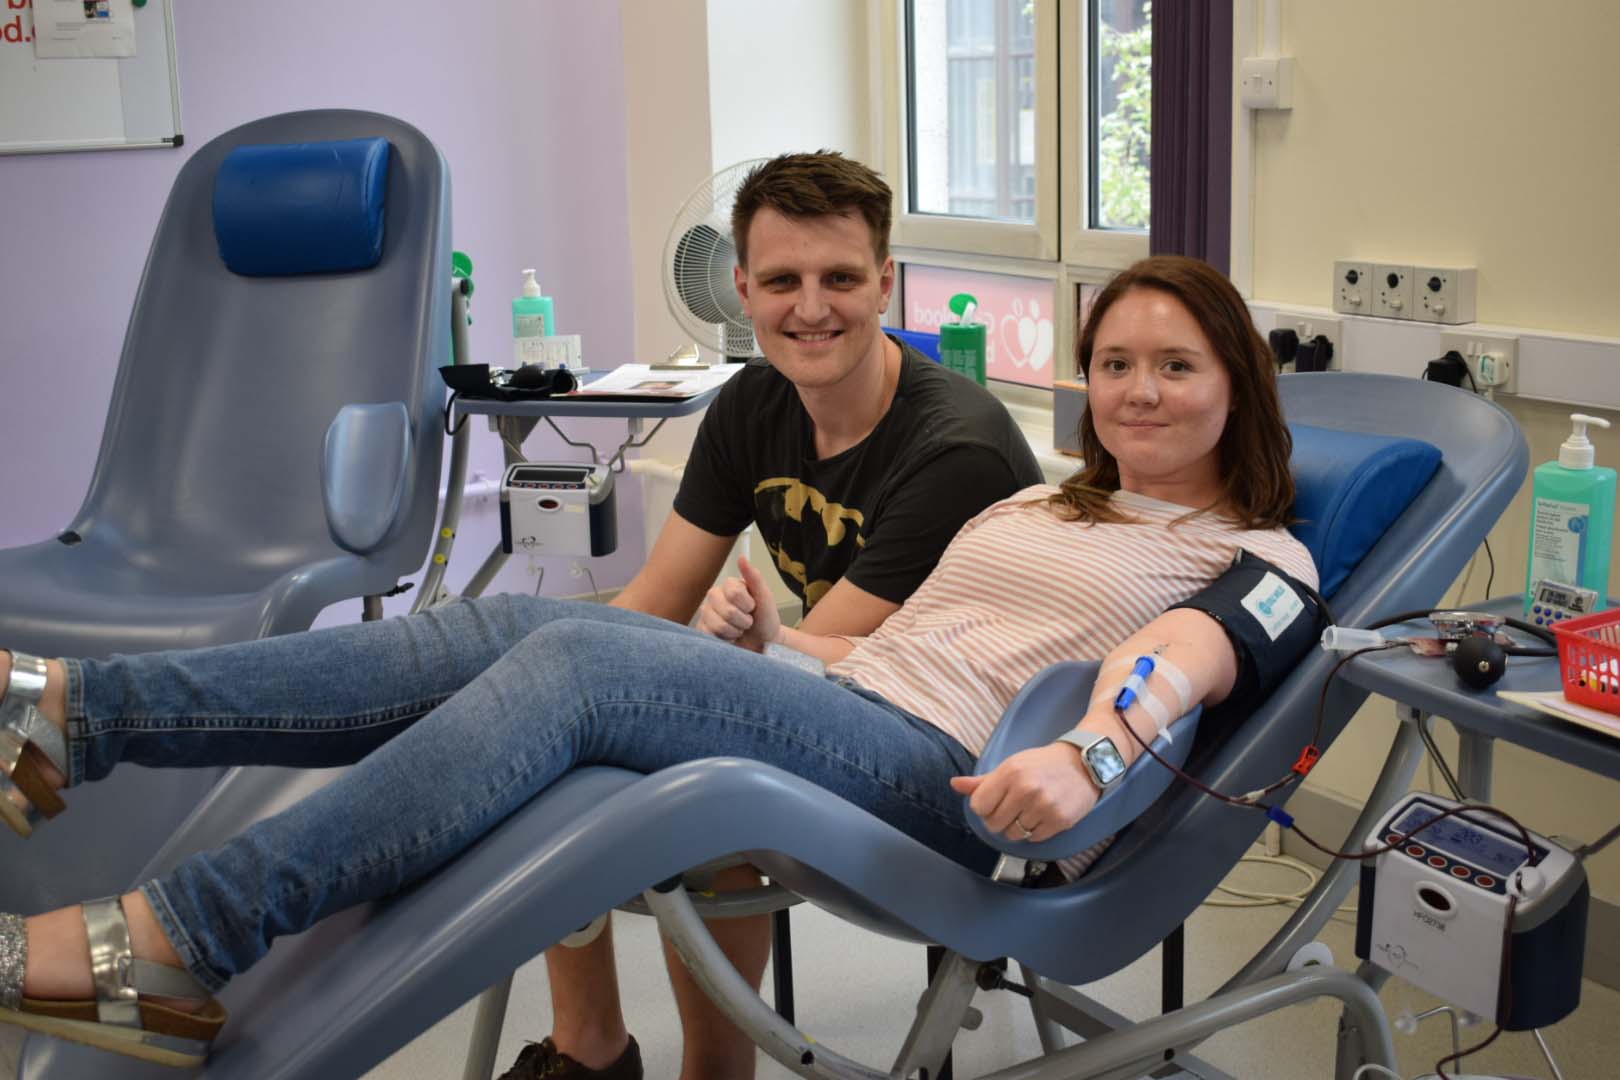 Hannah Cox gives blood while her fiance, Sam Smith, watches